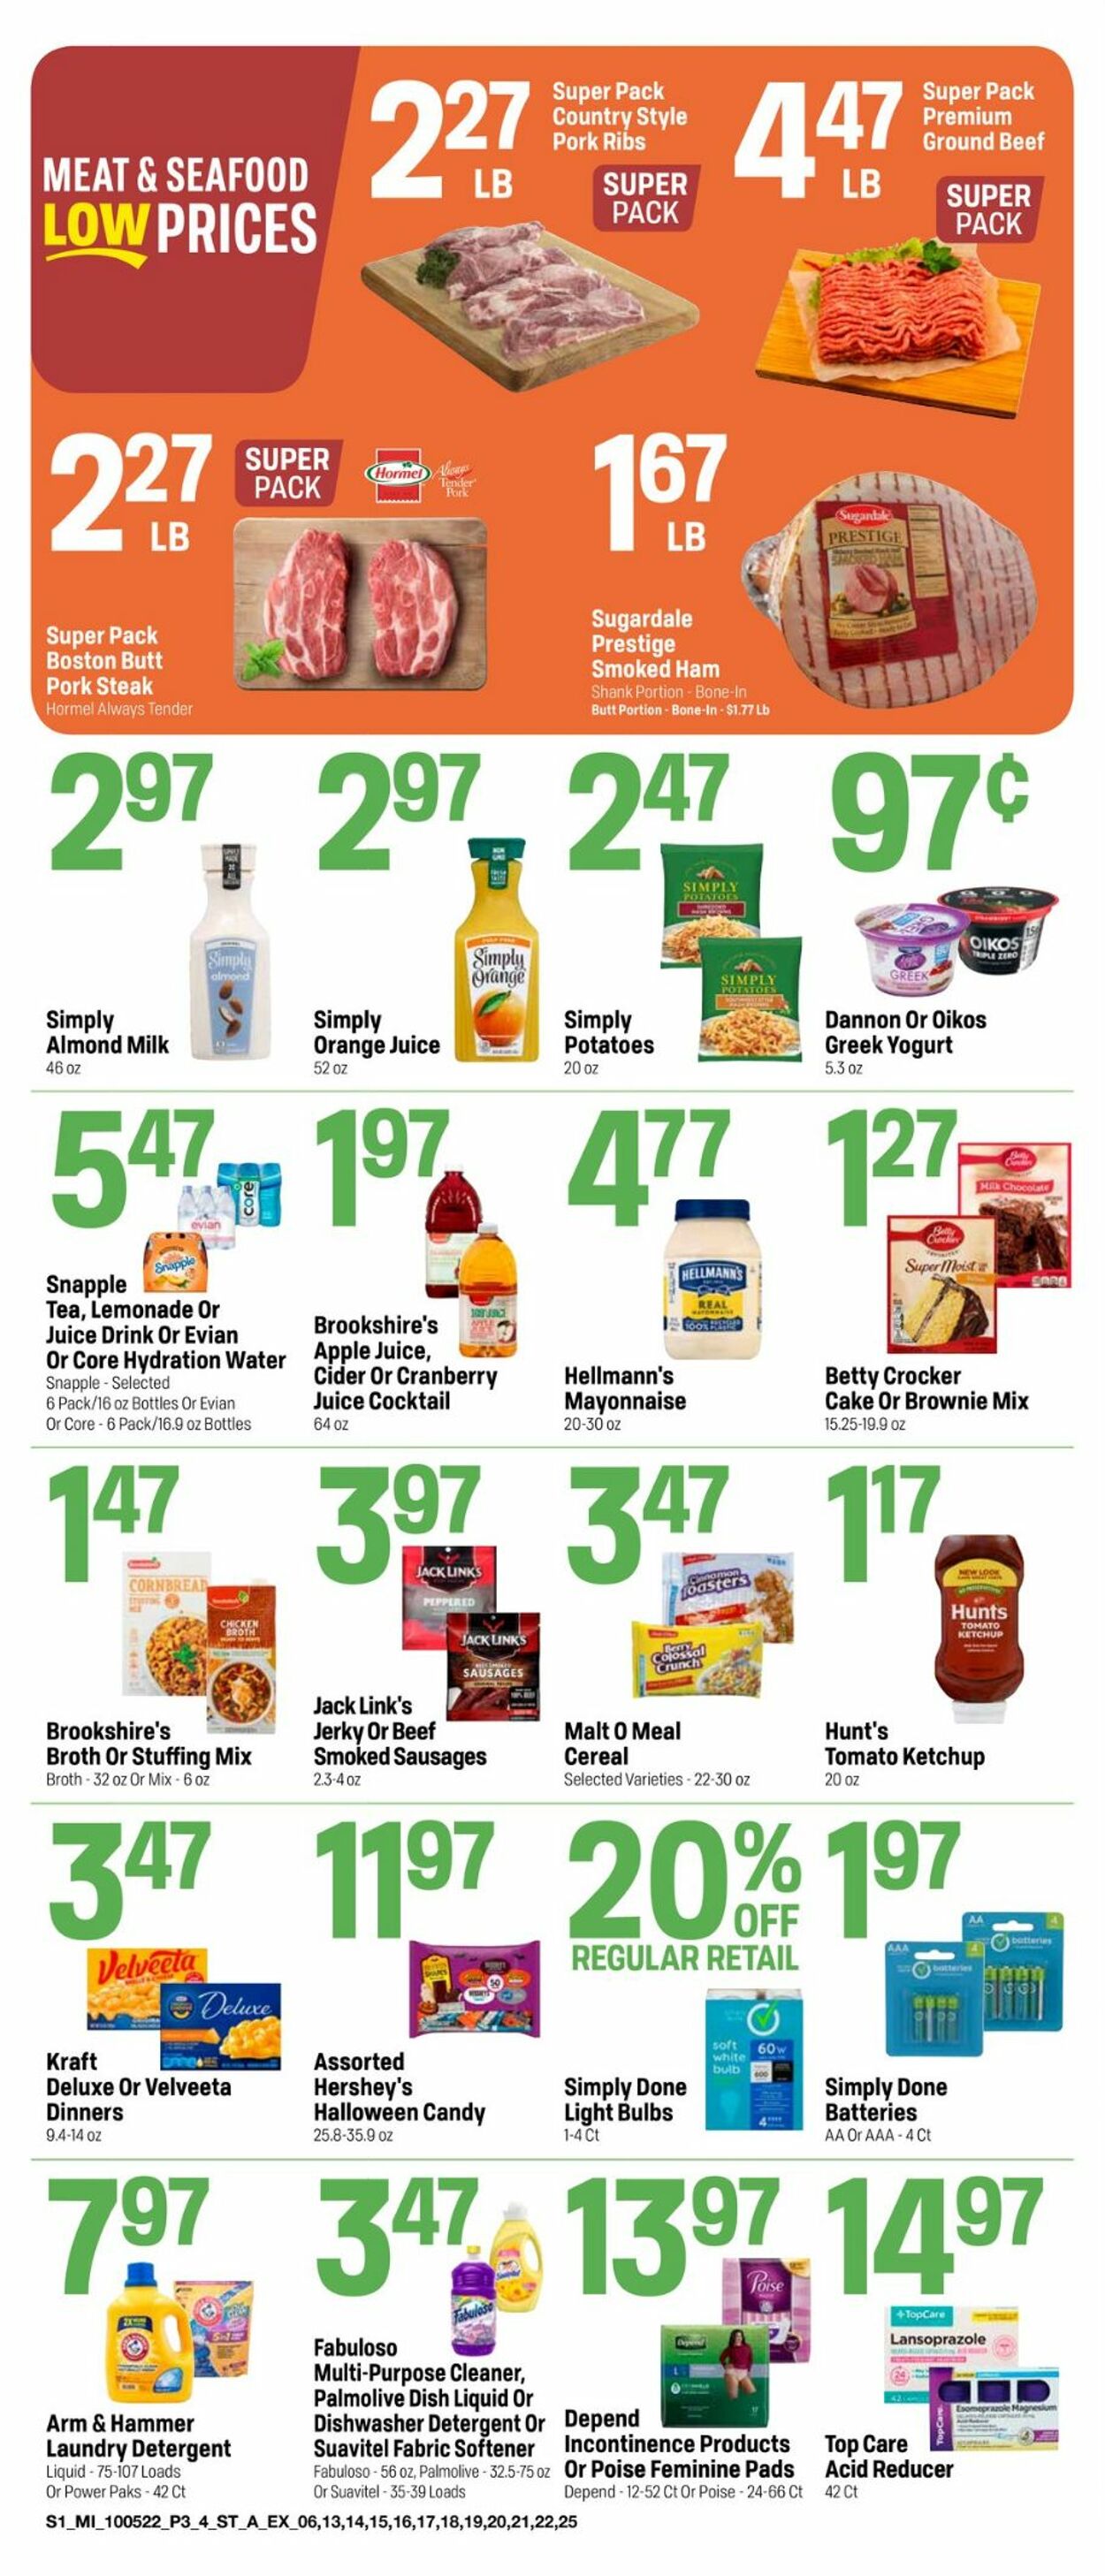 Catalogue Super 1 Foods from 10/05/2022